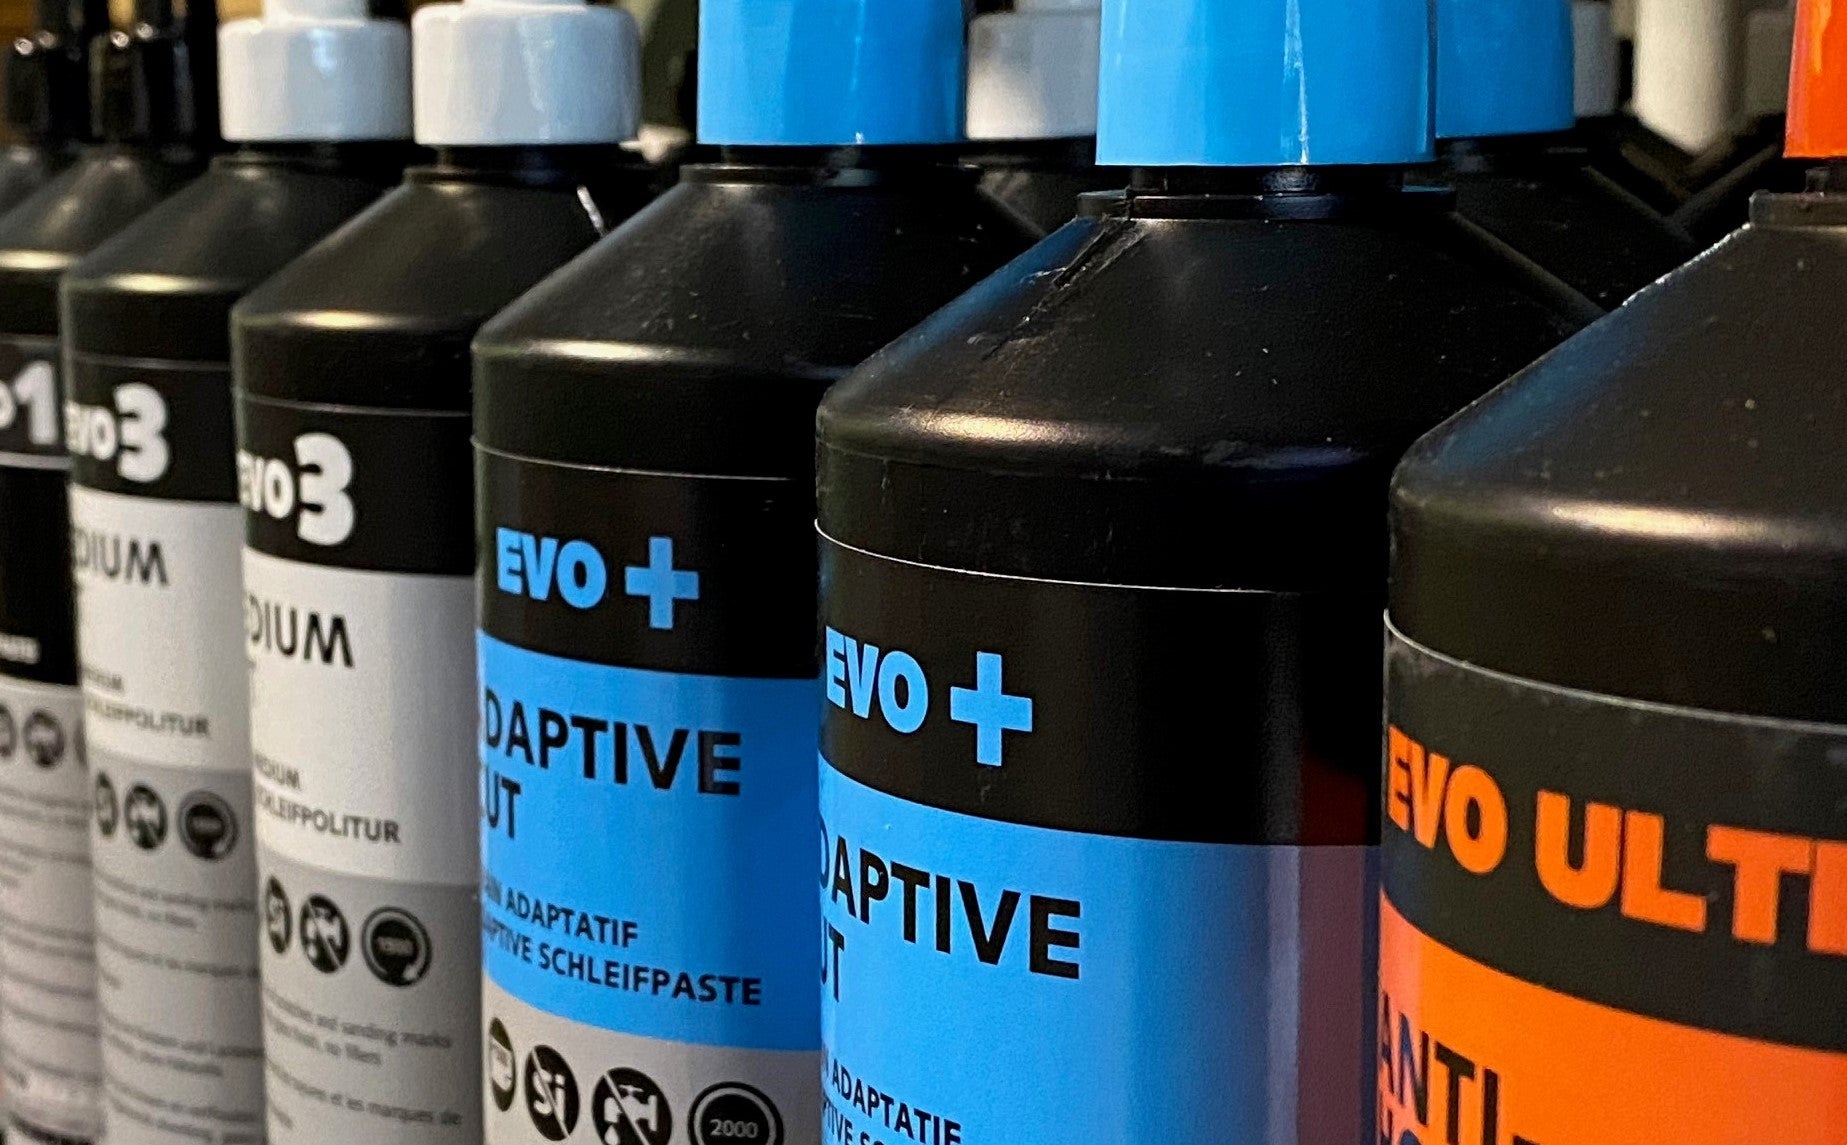 Evo Ultra - Ultra-Fine Polish 1ltrUltra-Fine Polish Ultra-fine compound for the permanent removal of holograms, micro scratches and hazing. Leaves a perfect high gloss finish. Ultra-fine diminishing abrasive Low dust Free from silicone and fillers Design